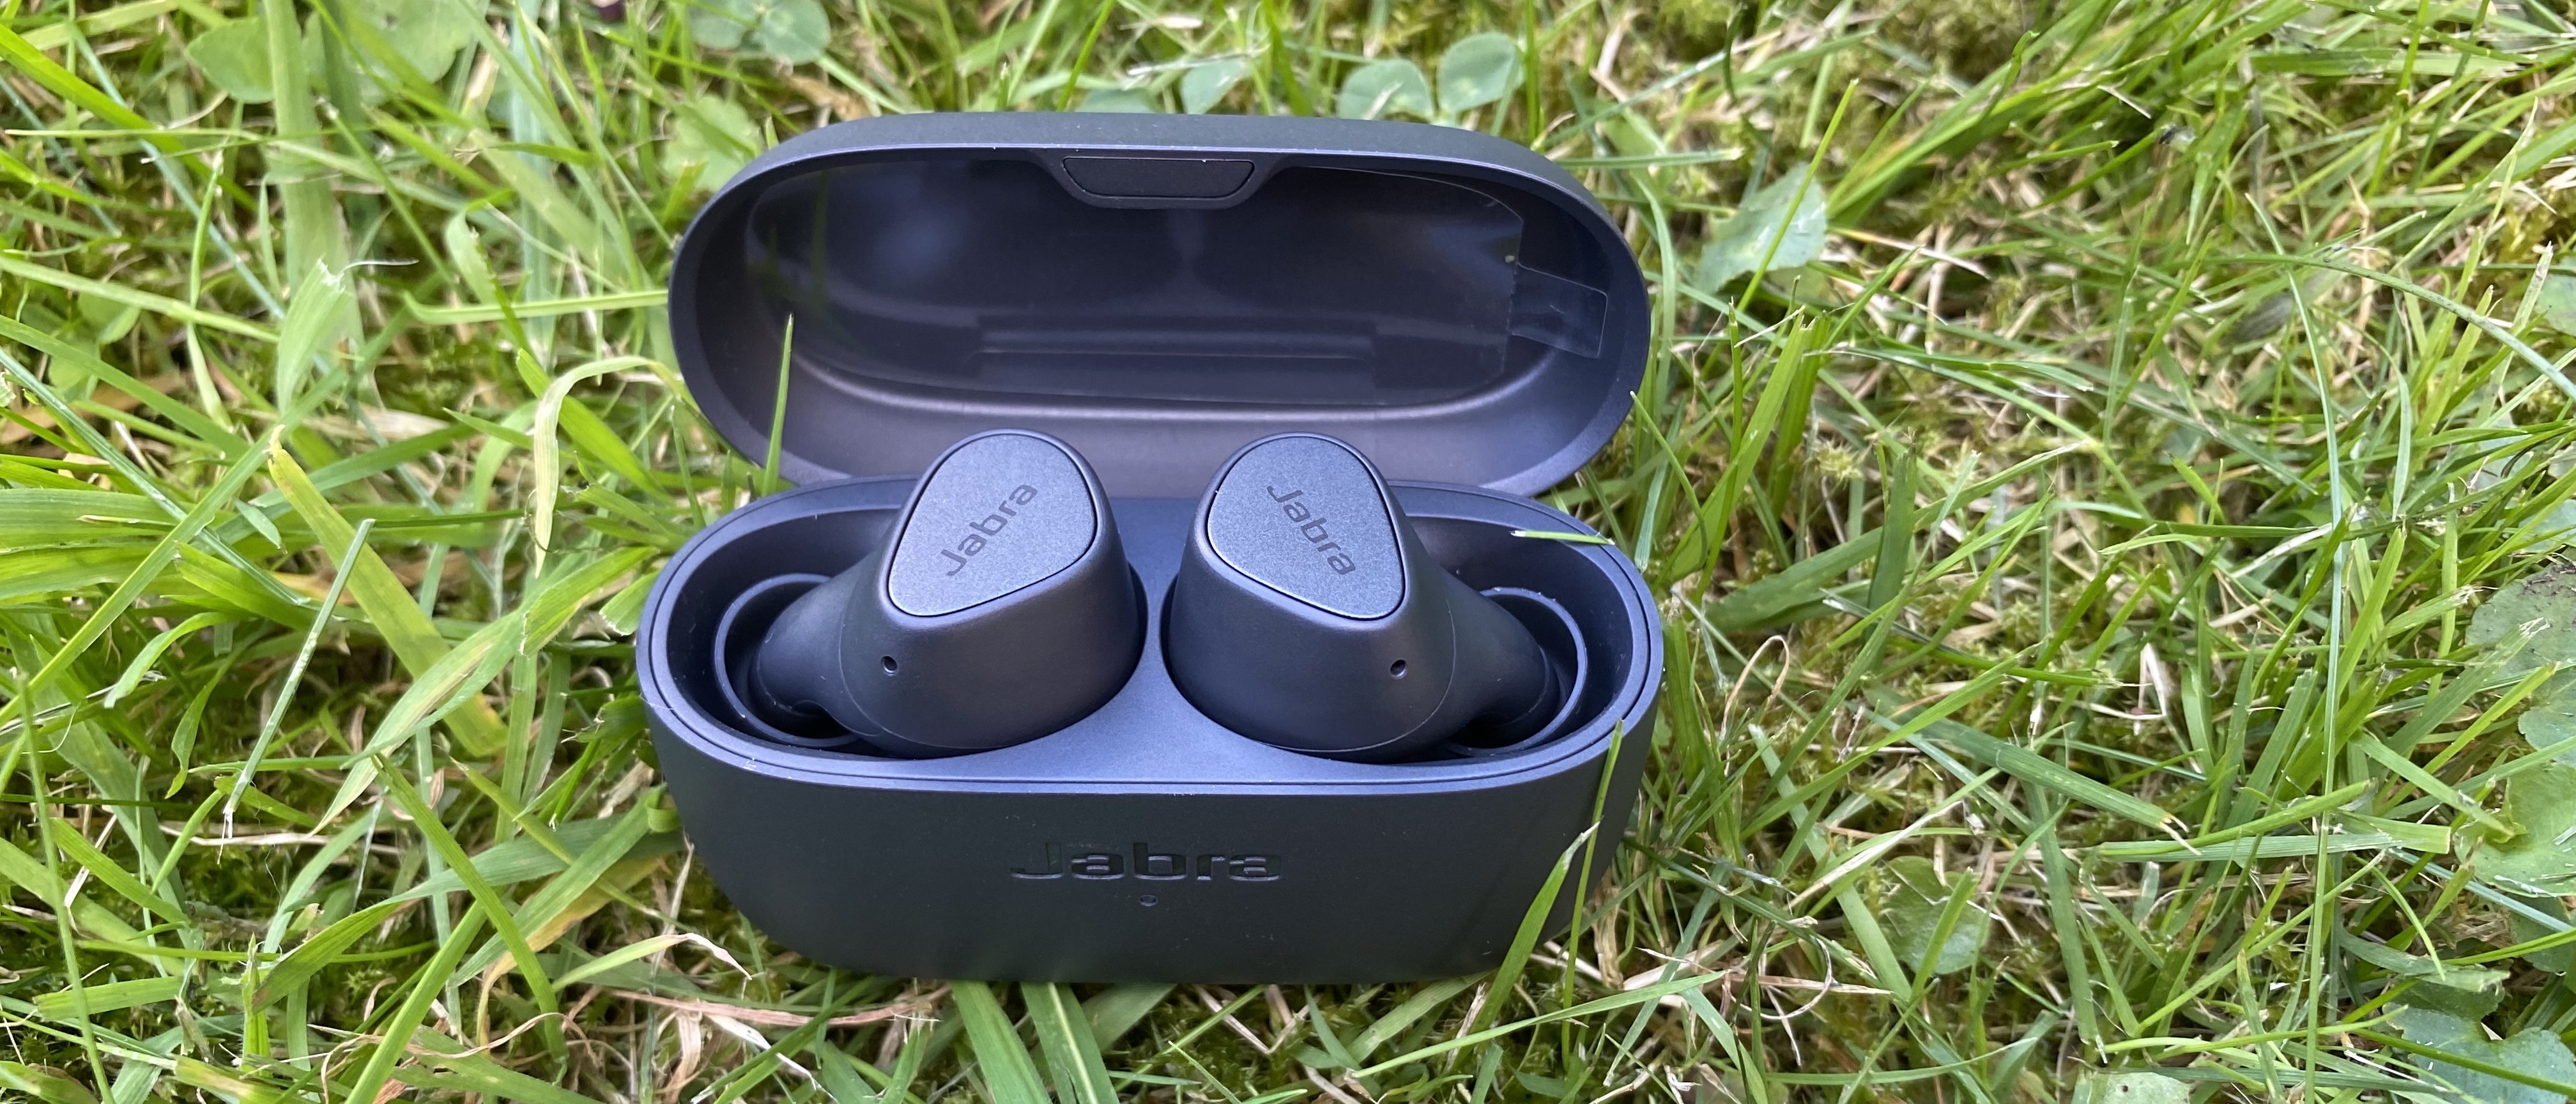 Jabra Elite 3 review: Forget AirPods, these $80 earbuds offer more